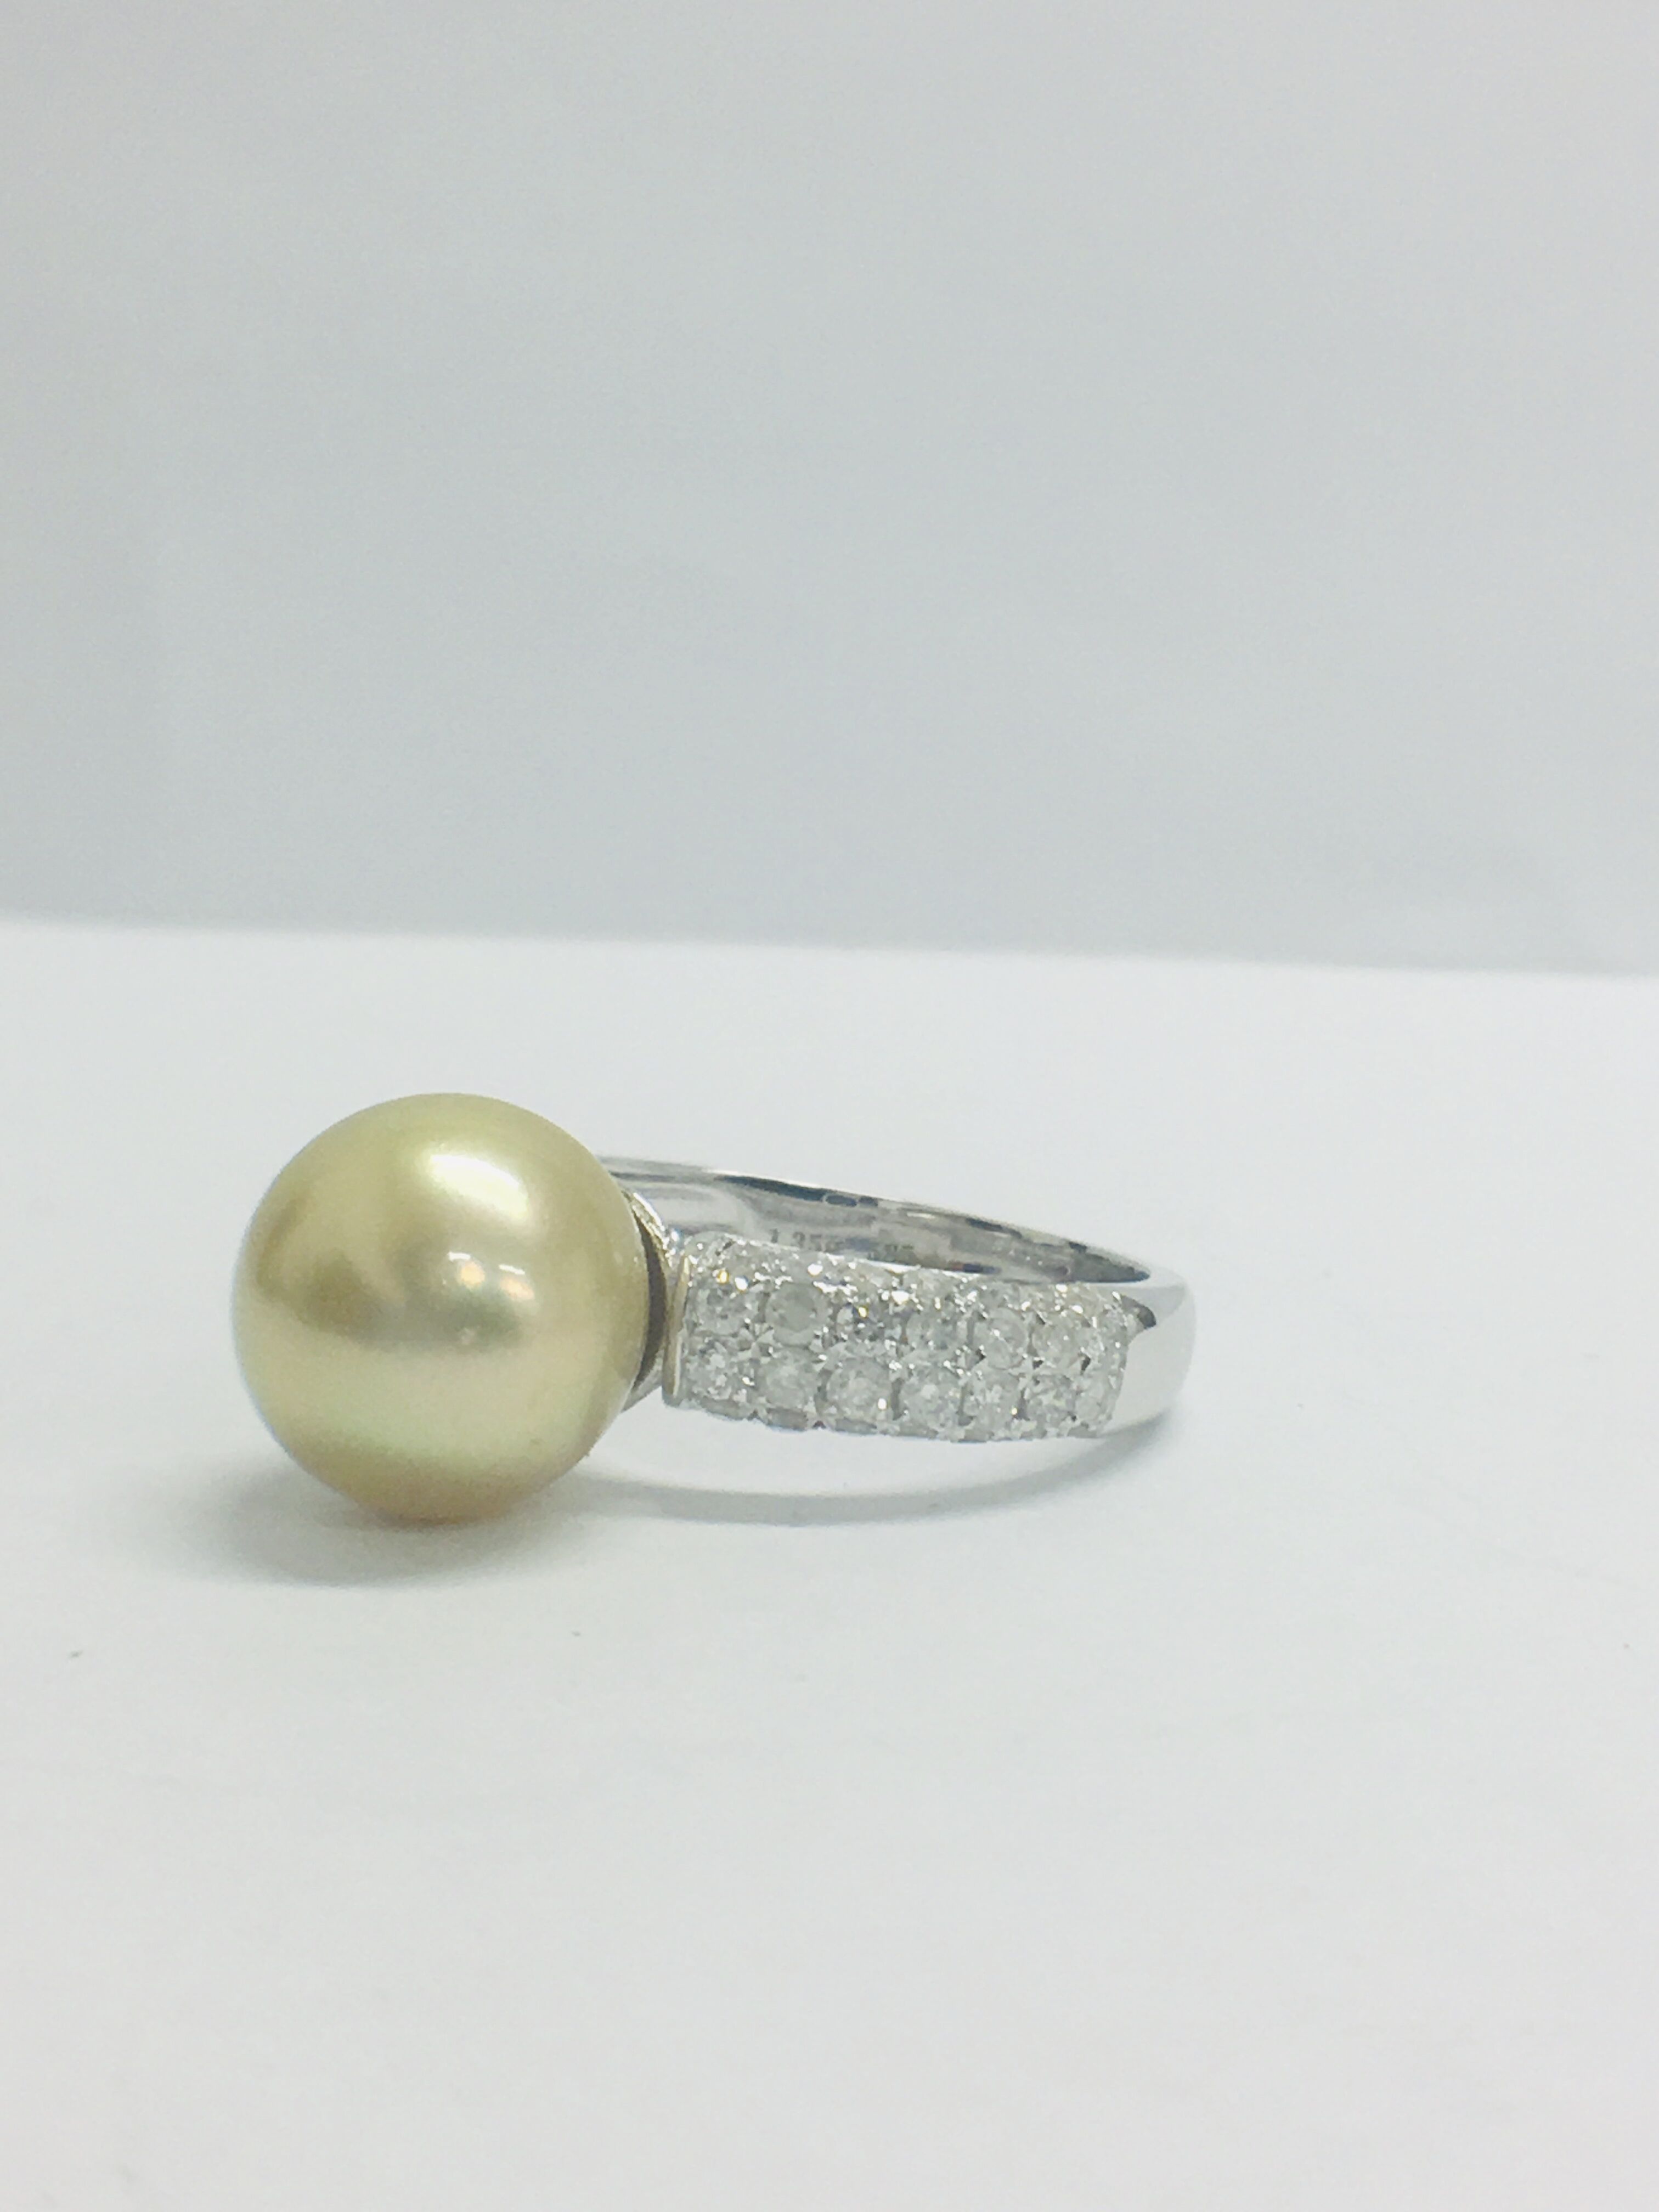 14Ct White Gold Pearl & Diamond Ring. - Image 2 of 11